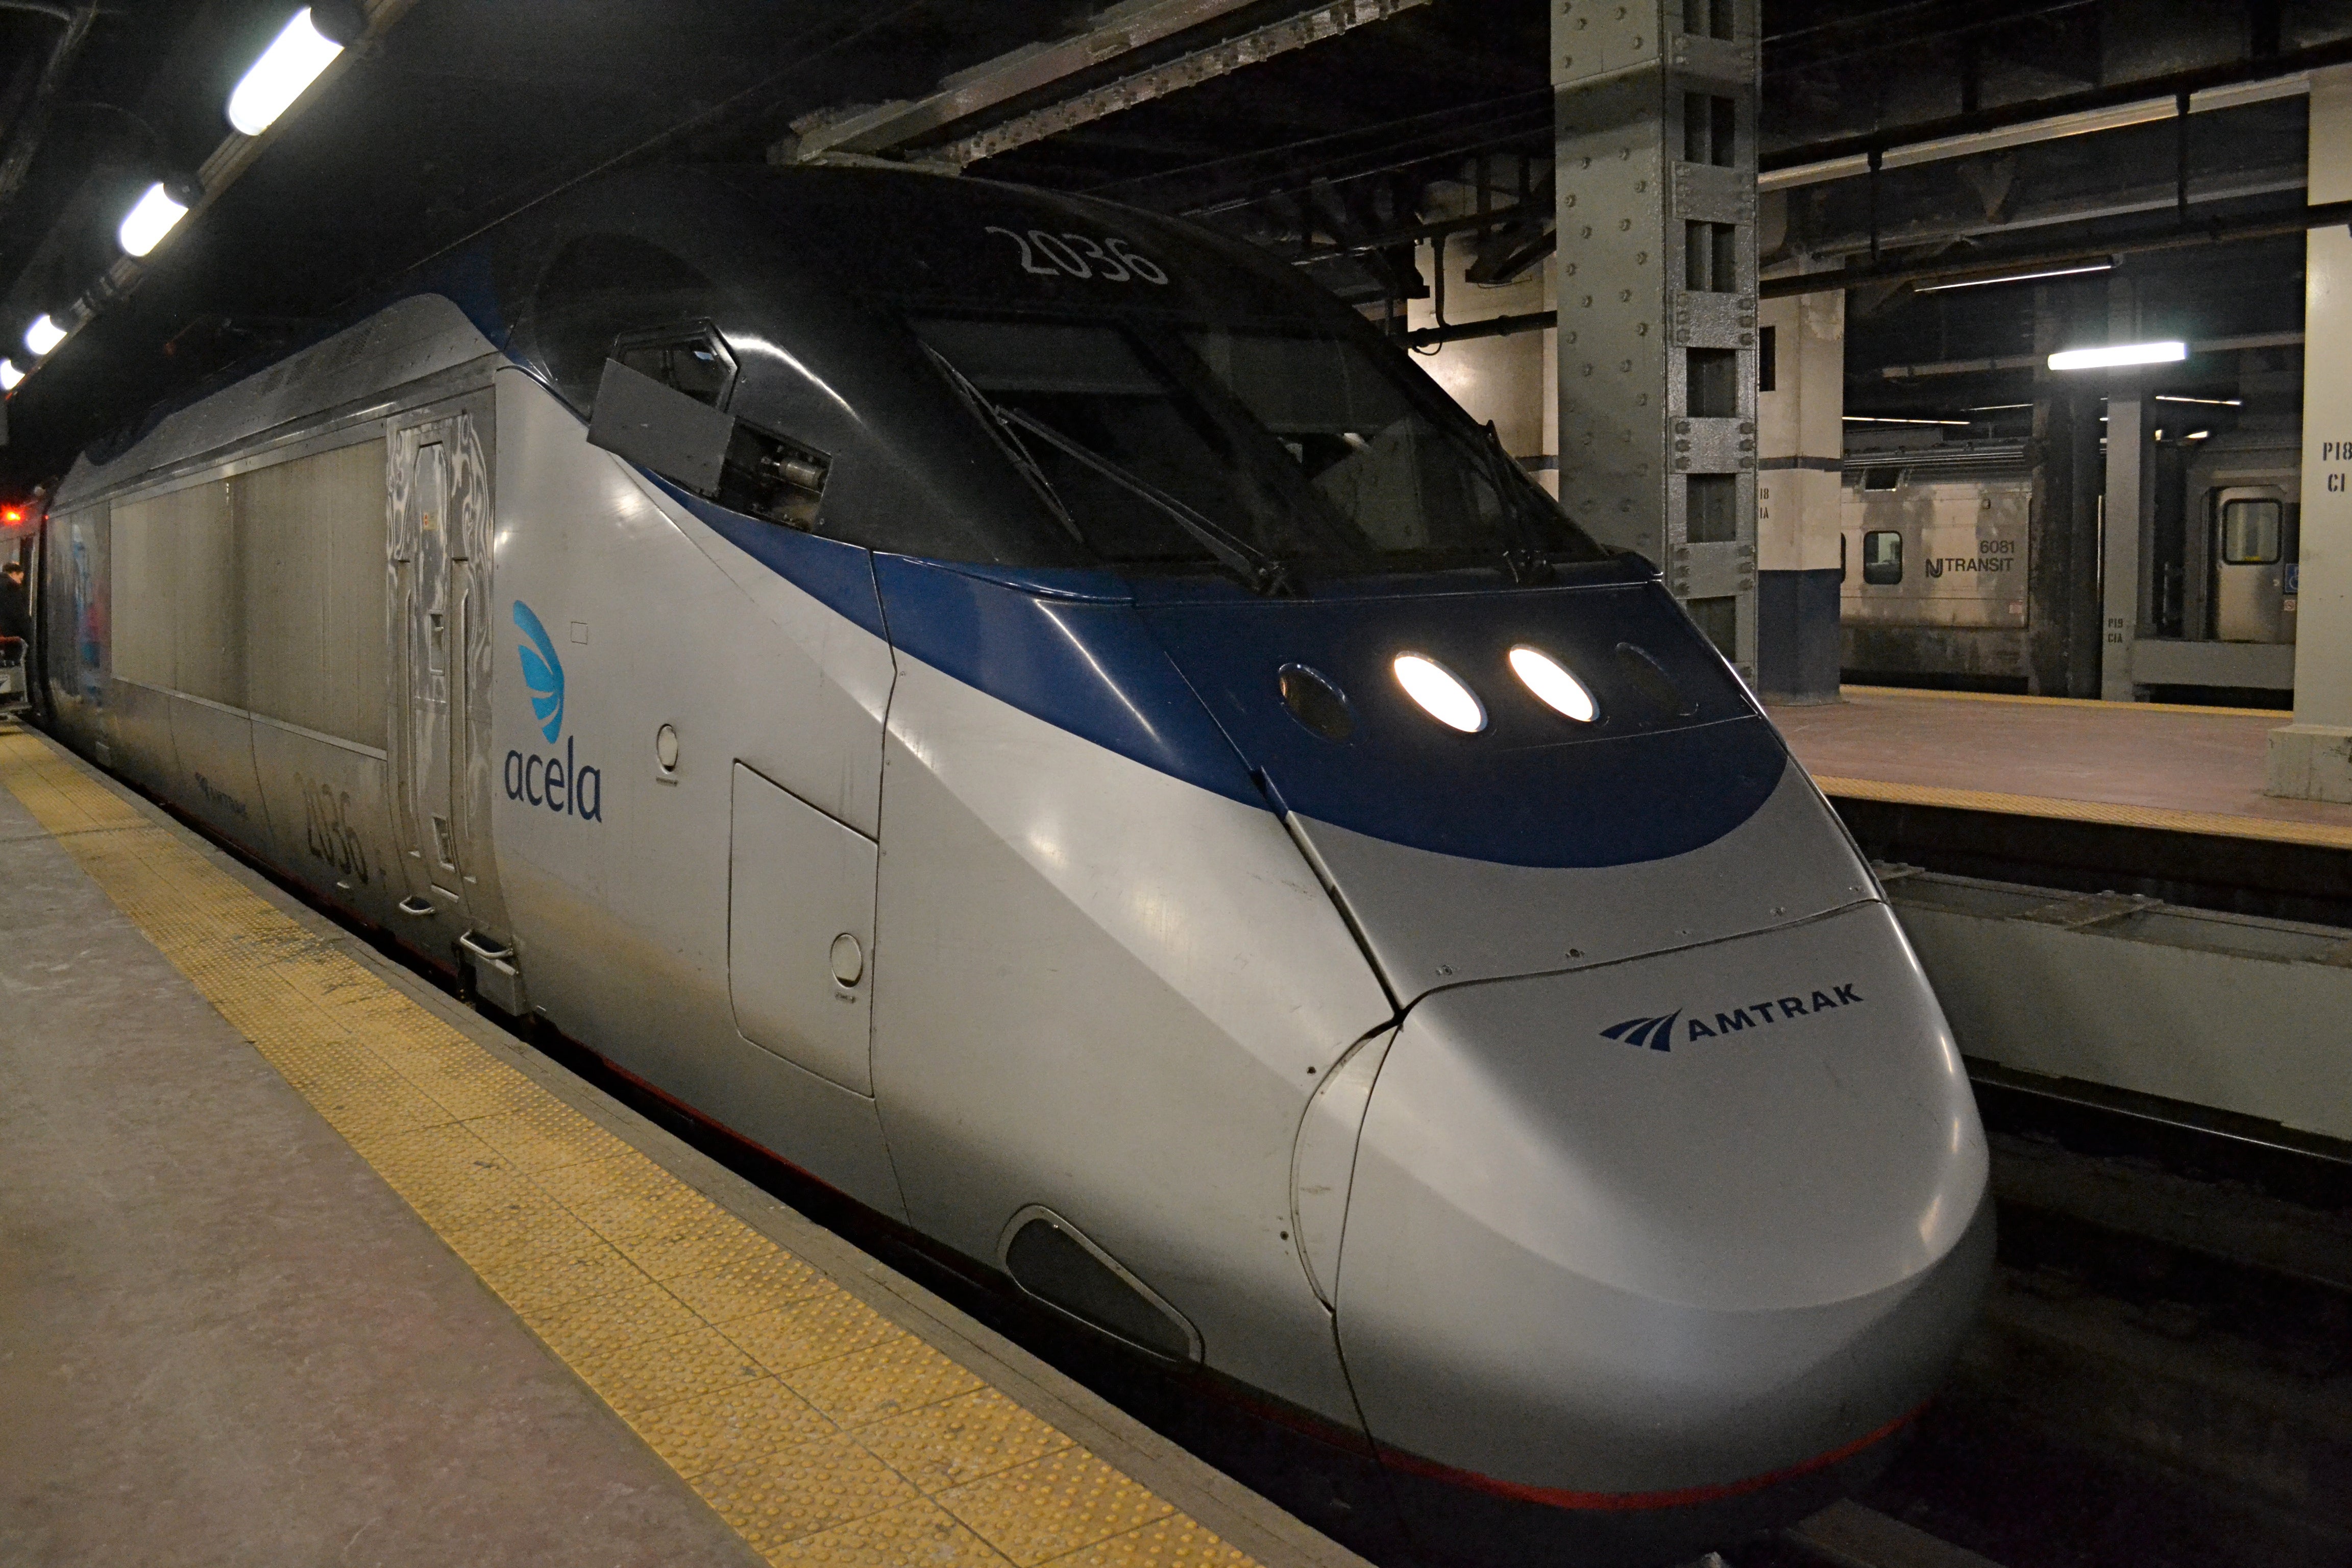 Some of the Acela train sets are 15 to 16 years old. At best, Amtrak expects their lifetime to be about 20 years